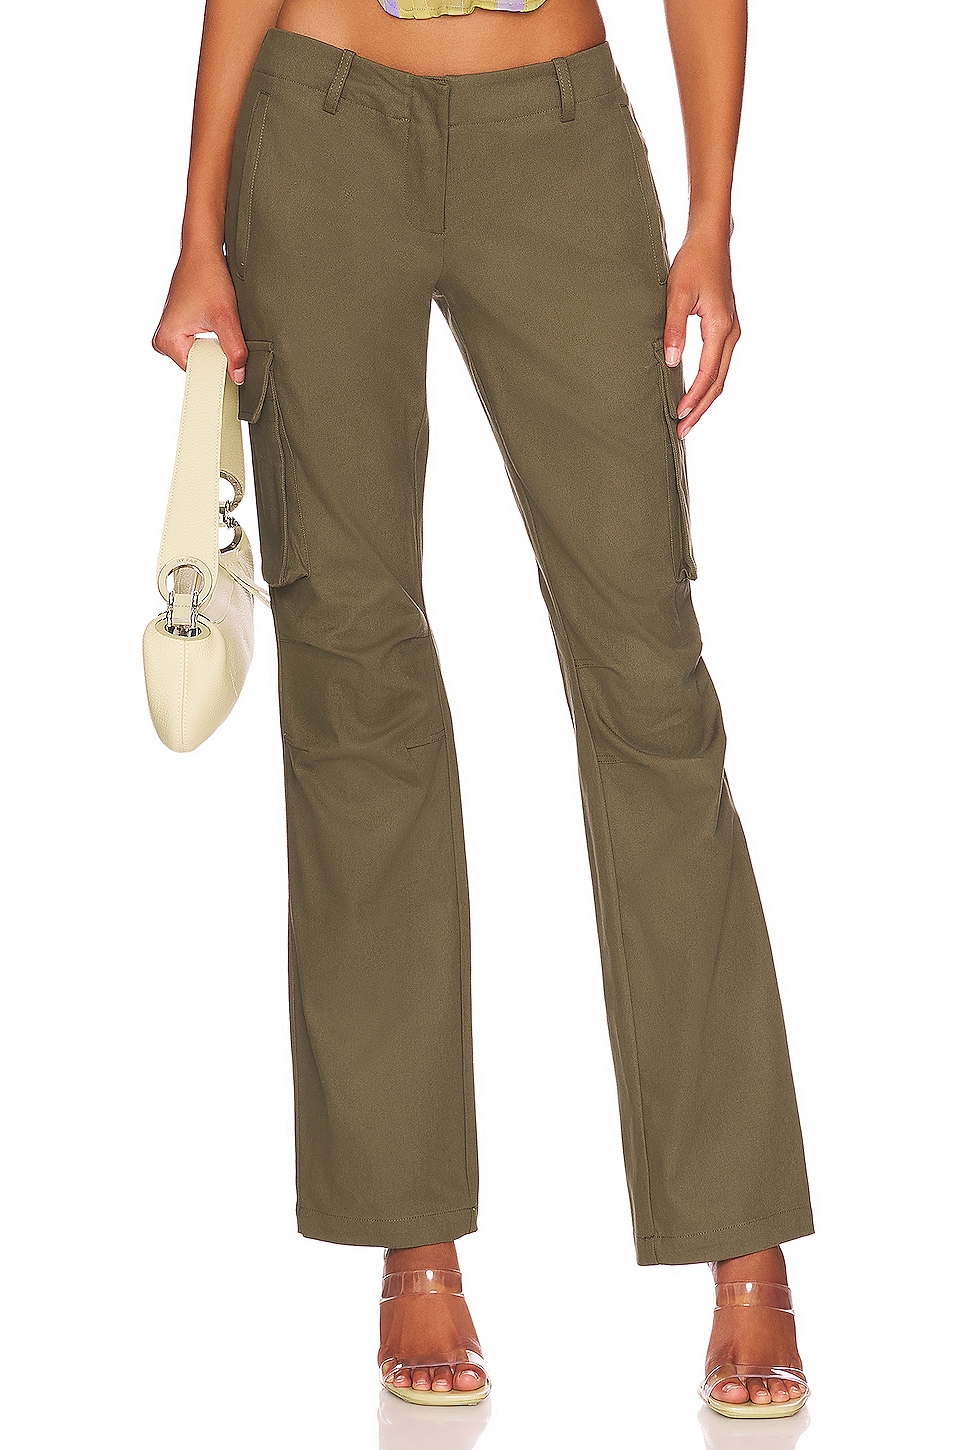 Miaou Raven Cargo Pant in Moss   REVOLVE